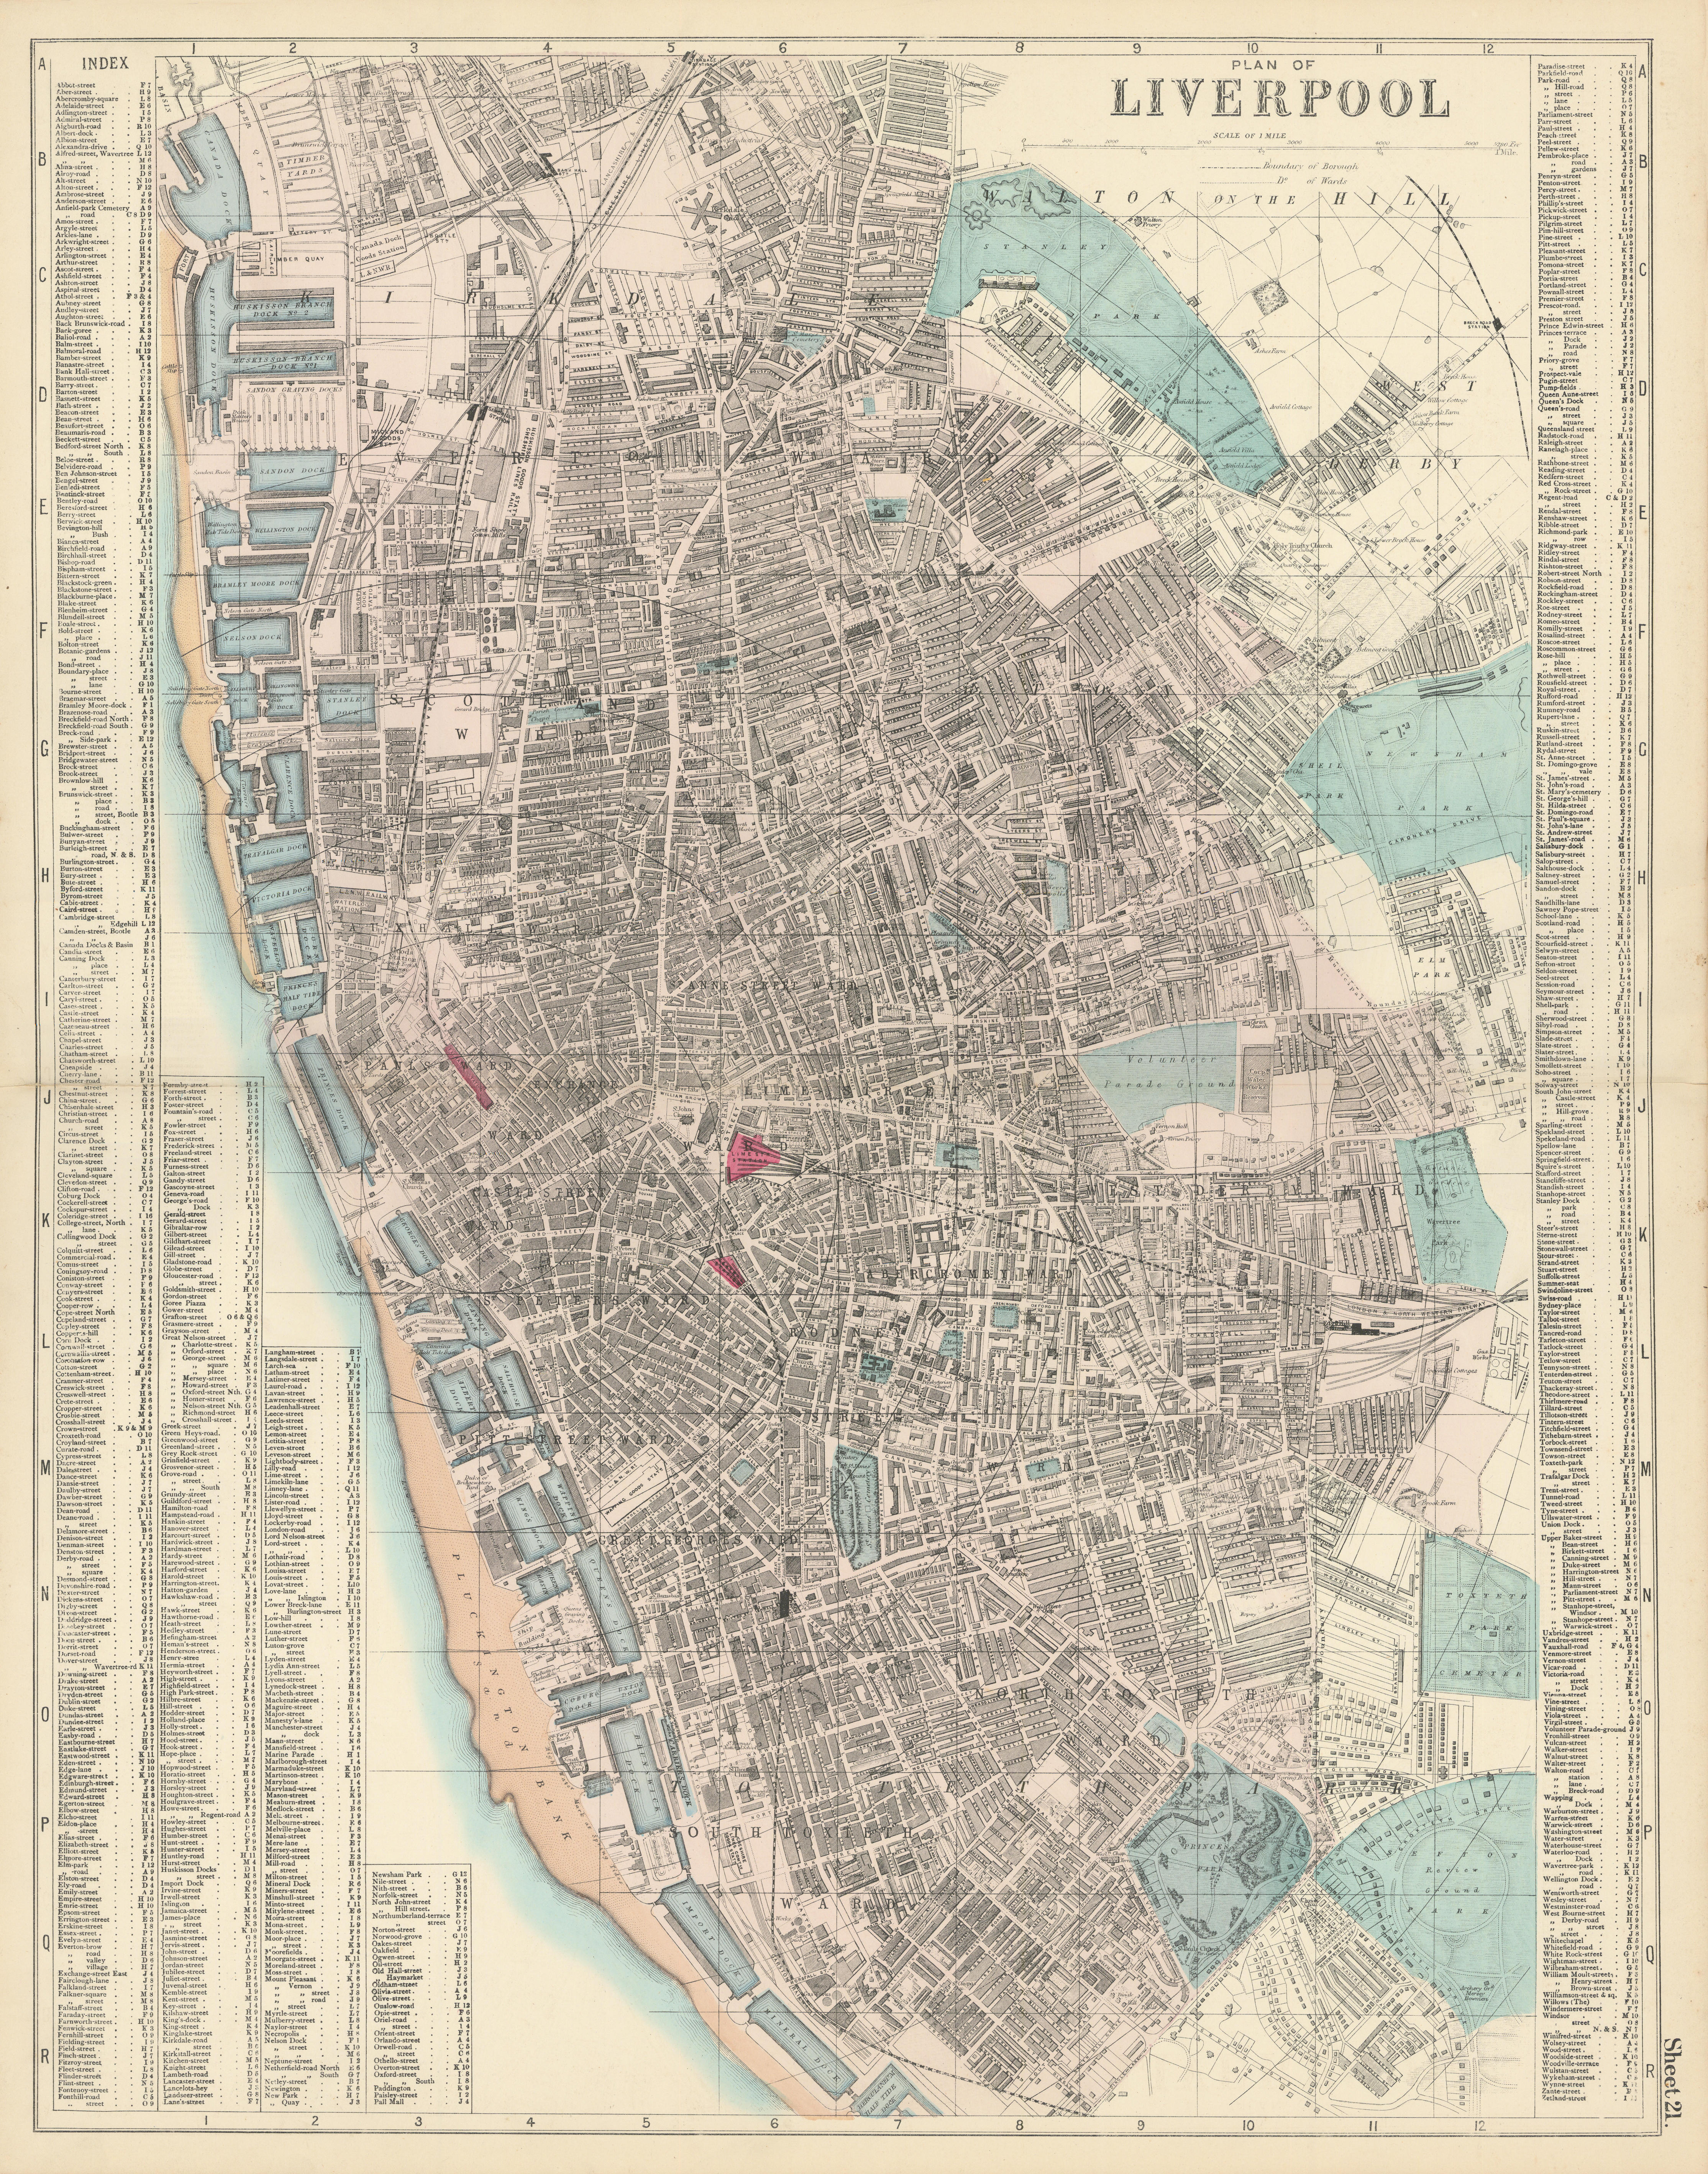 Associate Product LIVERPOOL Everton Waterfront Vauxhall Toxteth town city plan BACON 1883 map